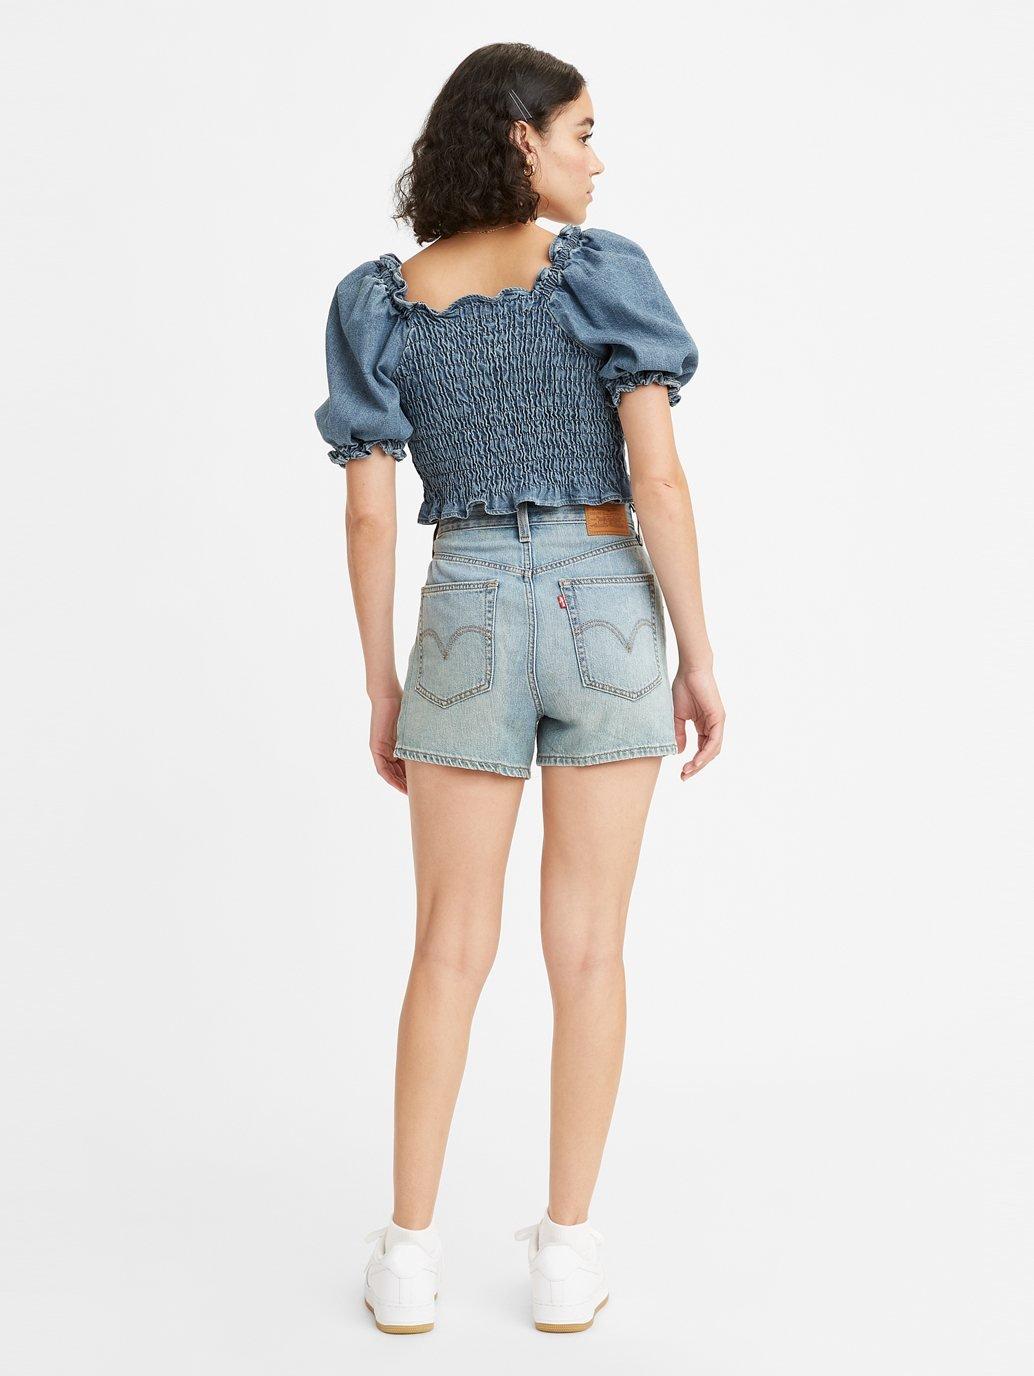 levis malaysia womens high loose shorts 394510009 02 Back